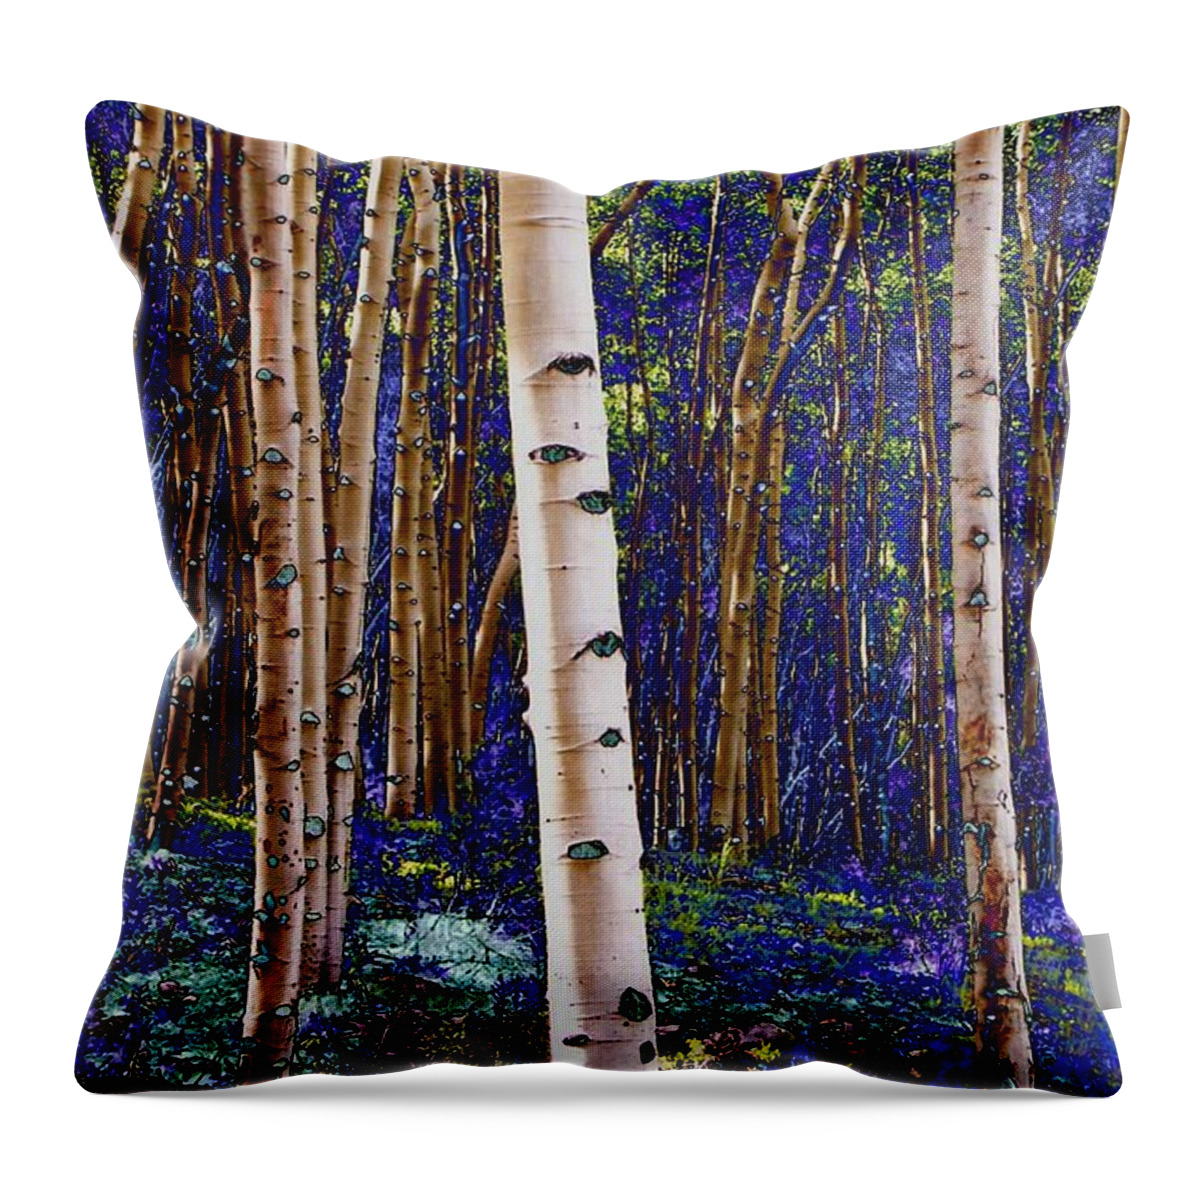 Aspens Throw Pillow featuring the photograph Blue Gold Aspens by Lanita Williams